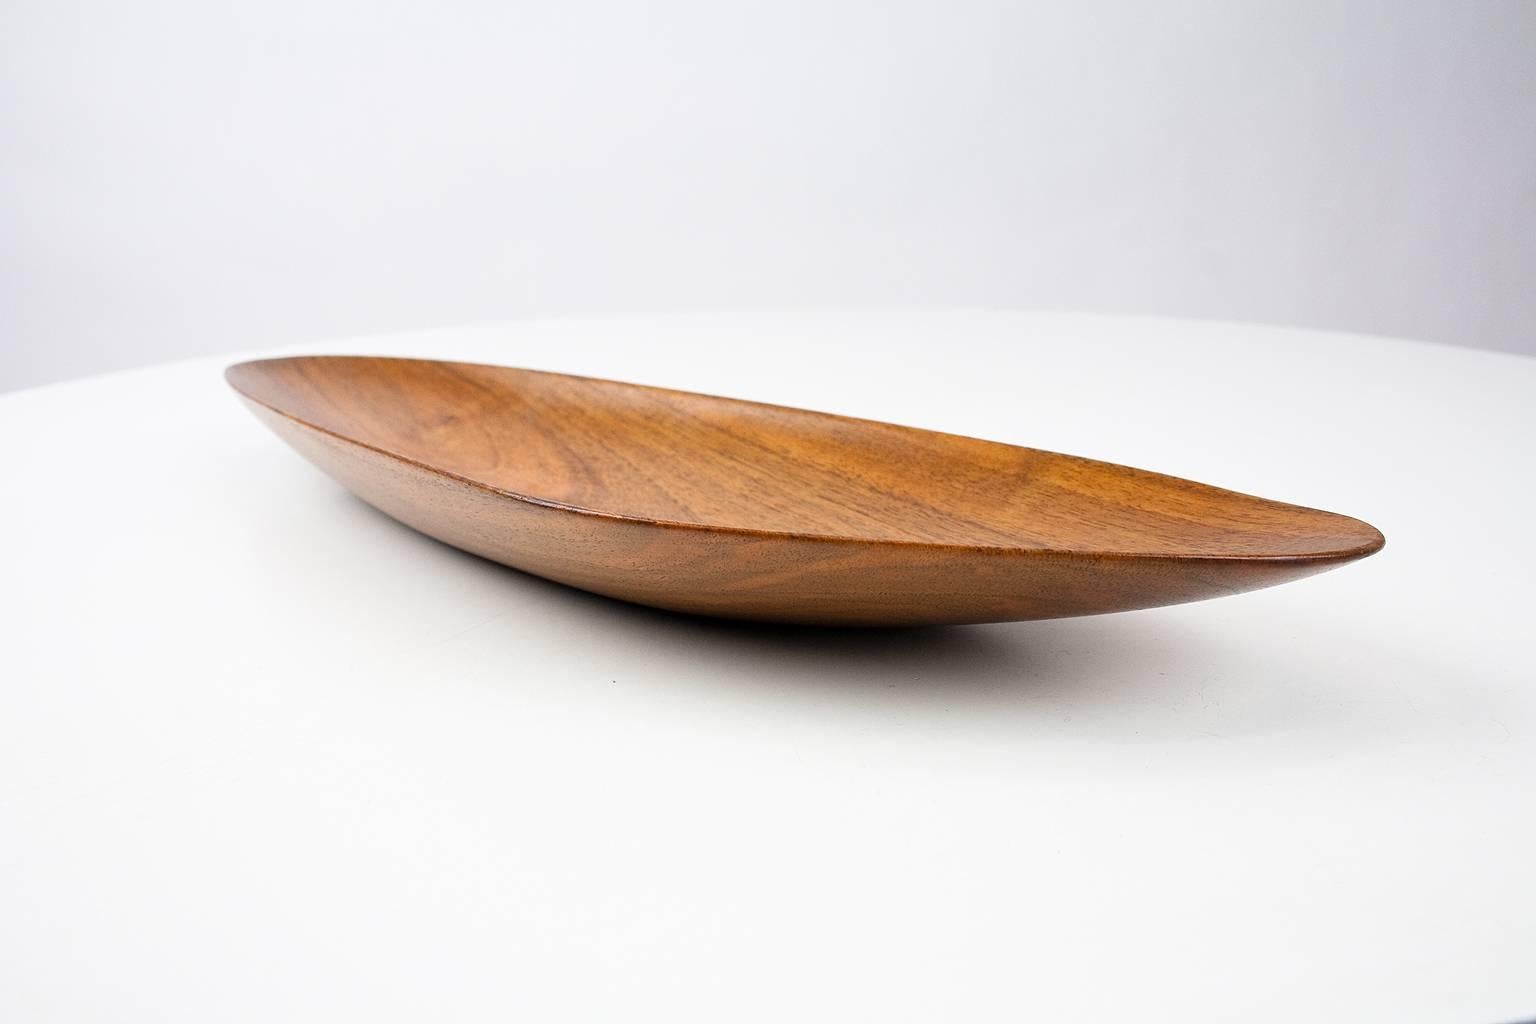 German sculptural teak wooden bowl / platter made by Oberaichen Holzmanufaktur, 1960s, German design. In a very nice organic / asymmetrical shape. Beautiful desk or table accessory.

Shipping is complementary to continental Europe, UK,